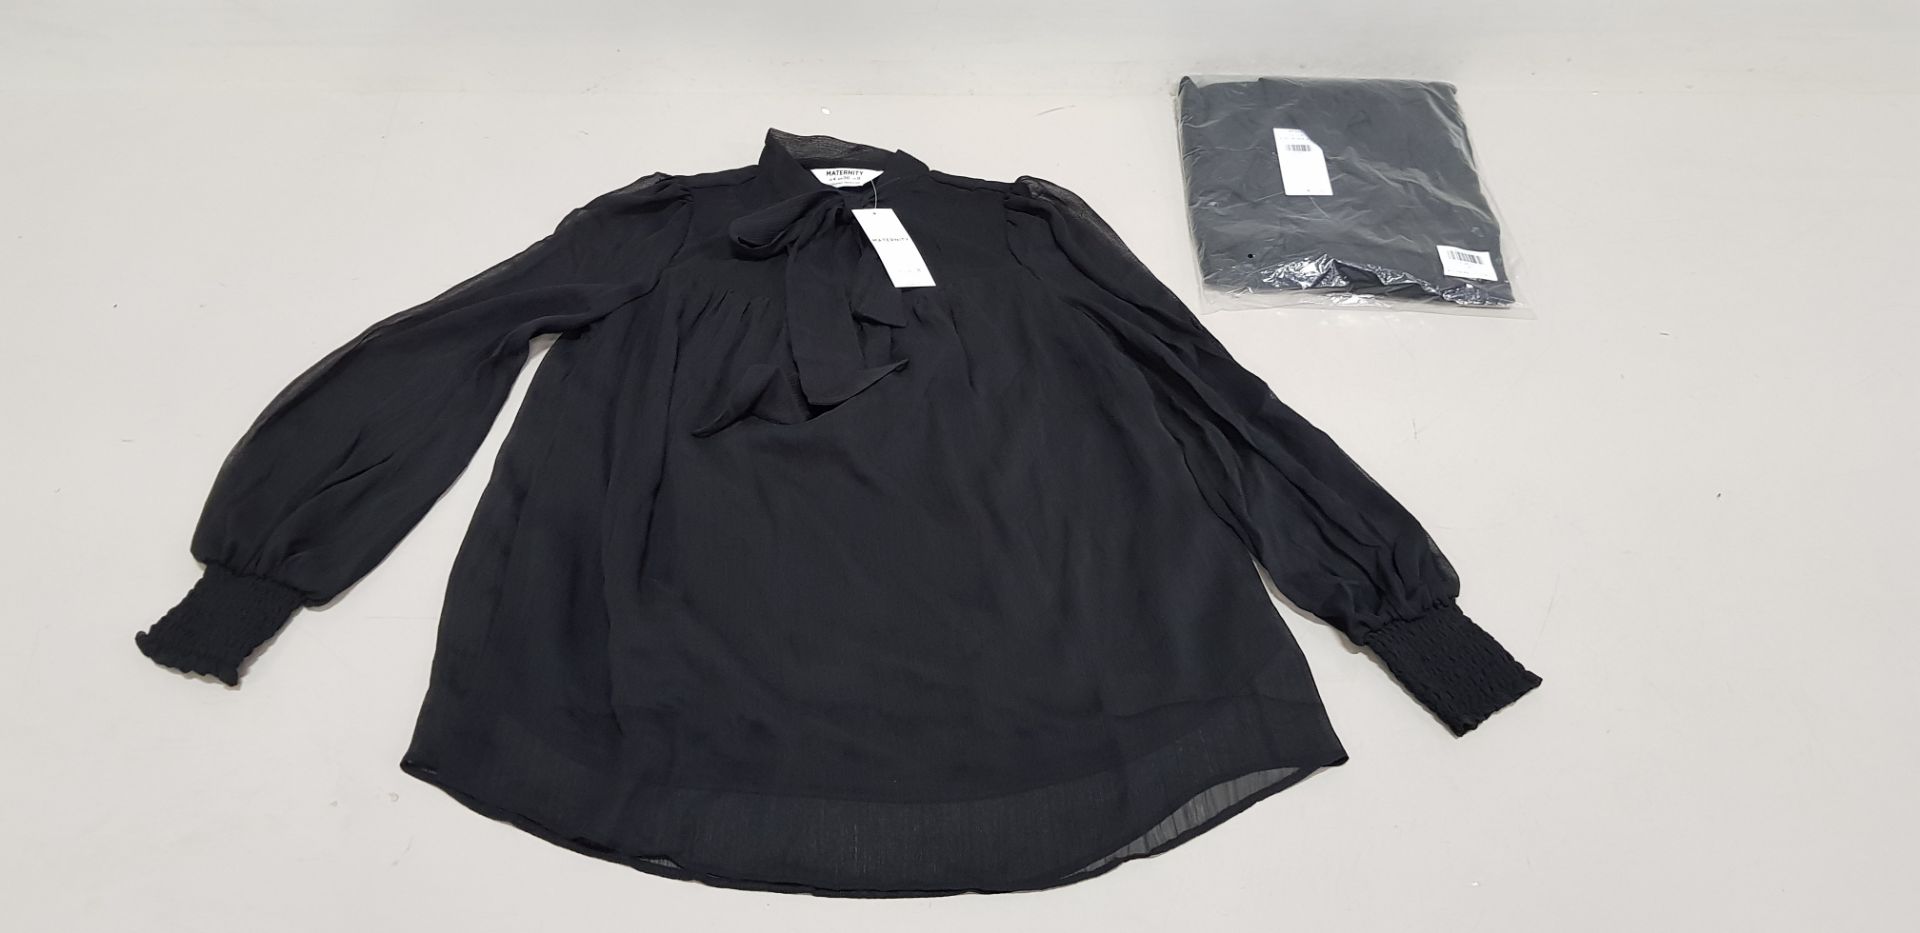 21 X BRAND NEW DOROTHY PERKINS BLACK BLOUSES UK SIZE 10 AND 14 RRP £24.00 (TOTAL RRP £504.00